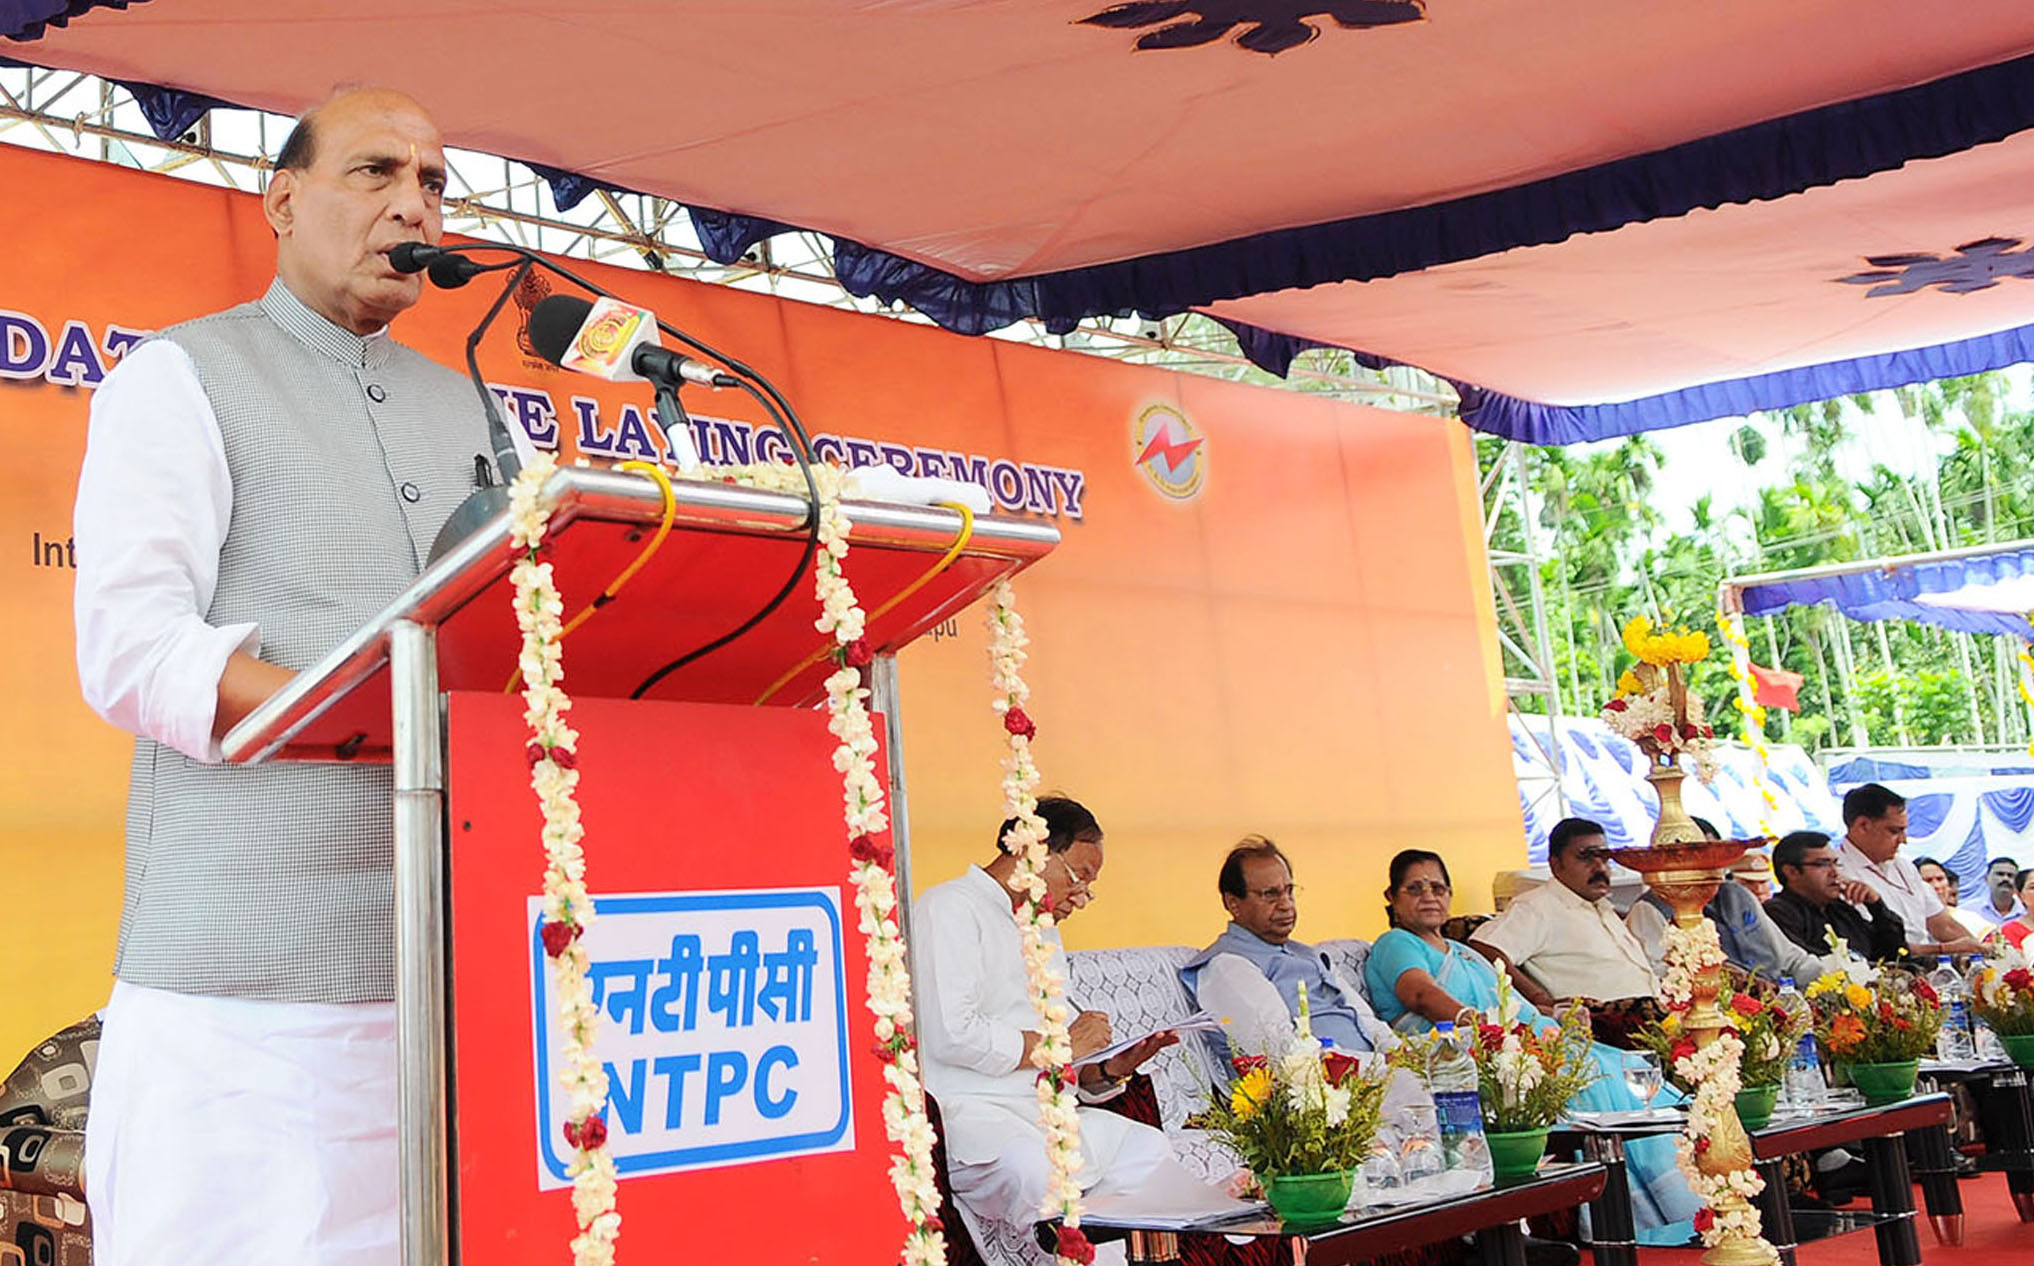 The Union Home Minister Shri Rajnath Singh addressing at foundation stone laying ceremony for two solar power plants, in South Andaman on April 07, 2017. 	The Lieutenant Governor of Andaman and Nicobar Islands, Prof. Jagdish Mukhi is also seen.